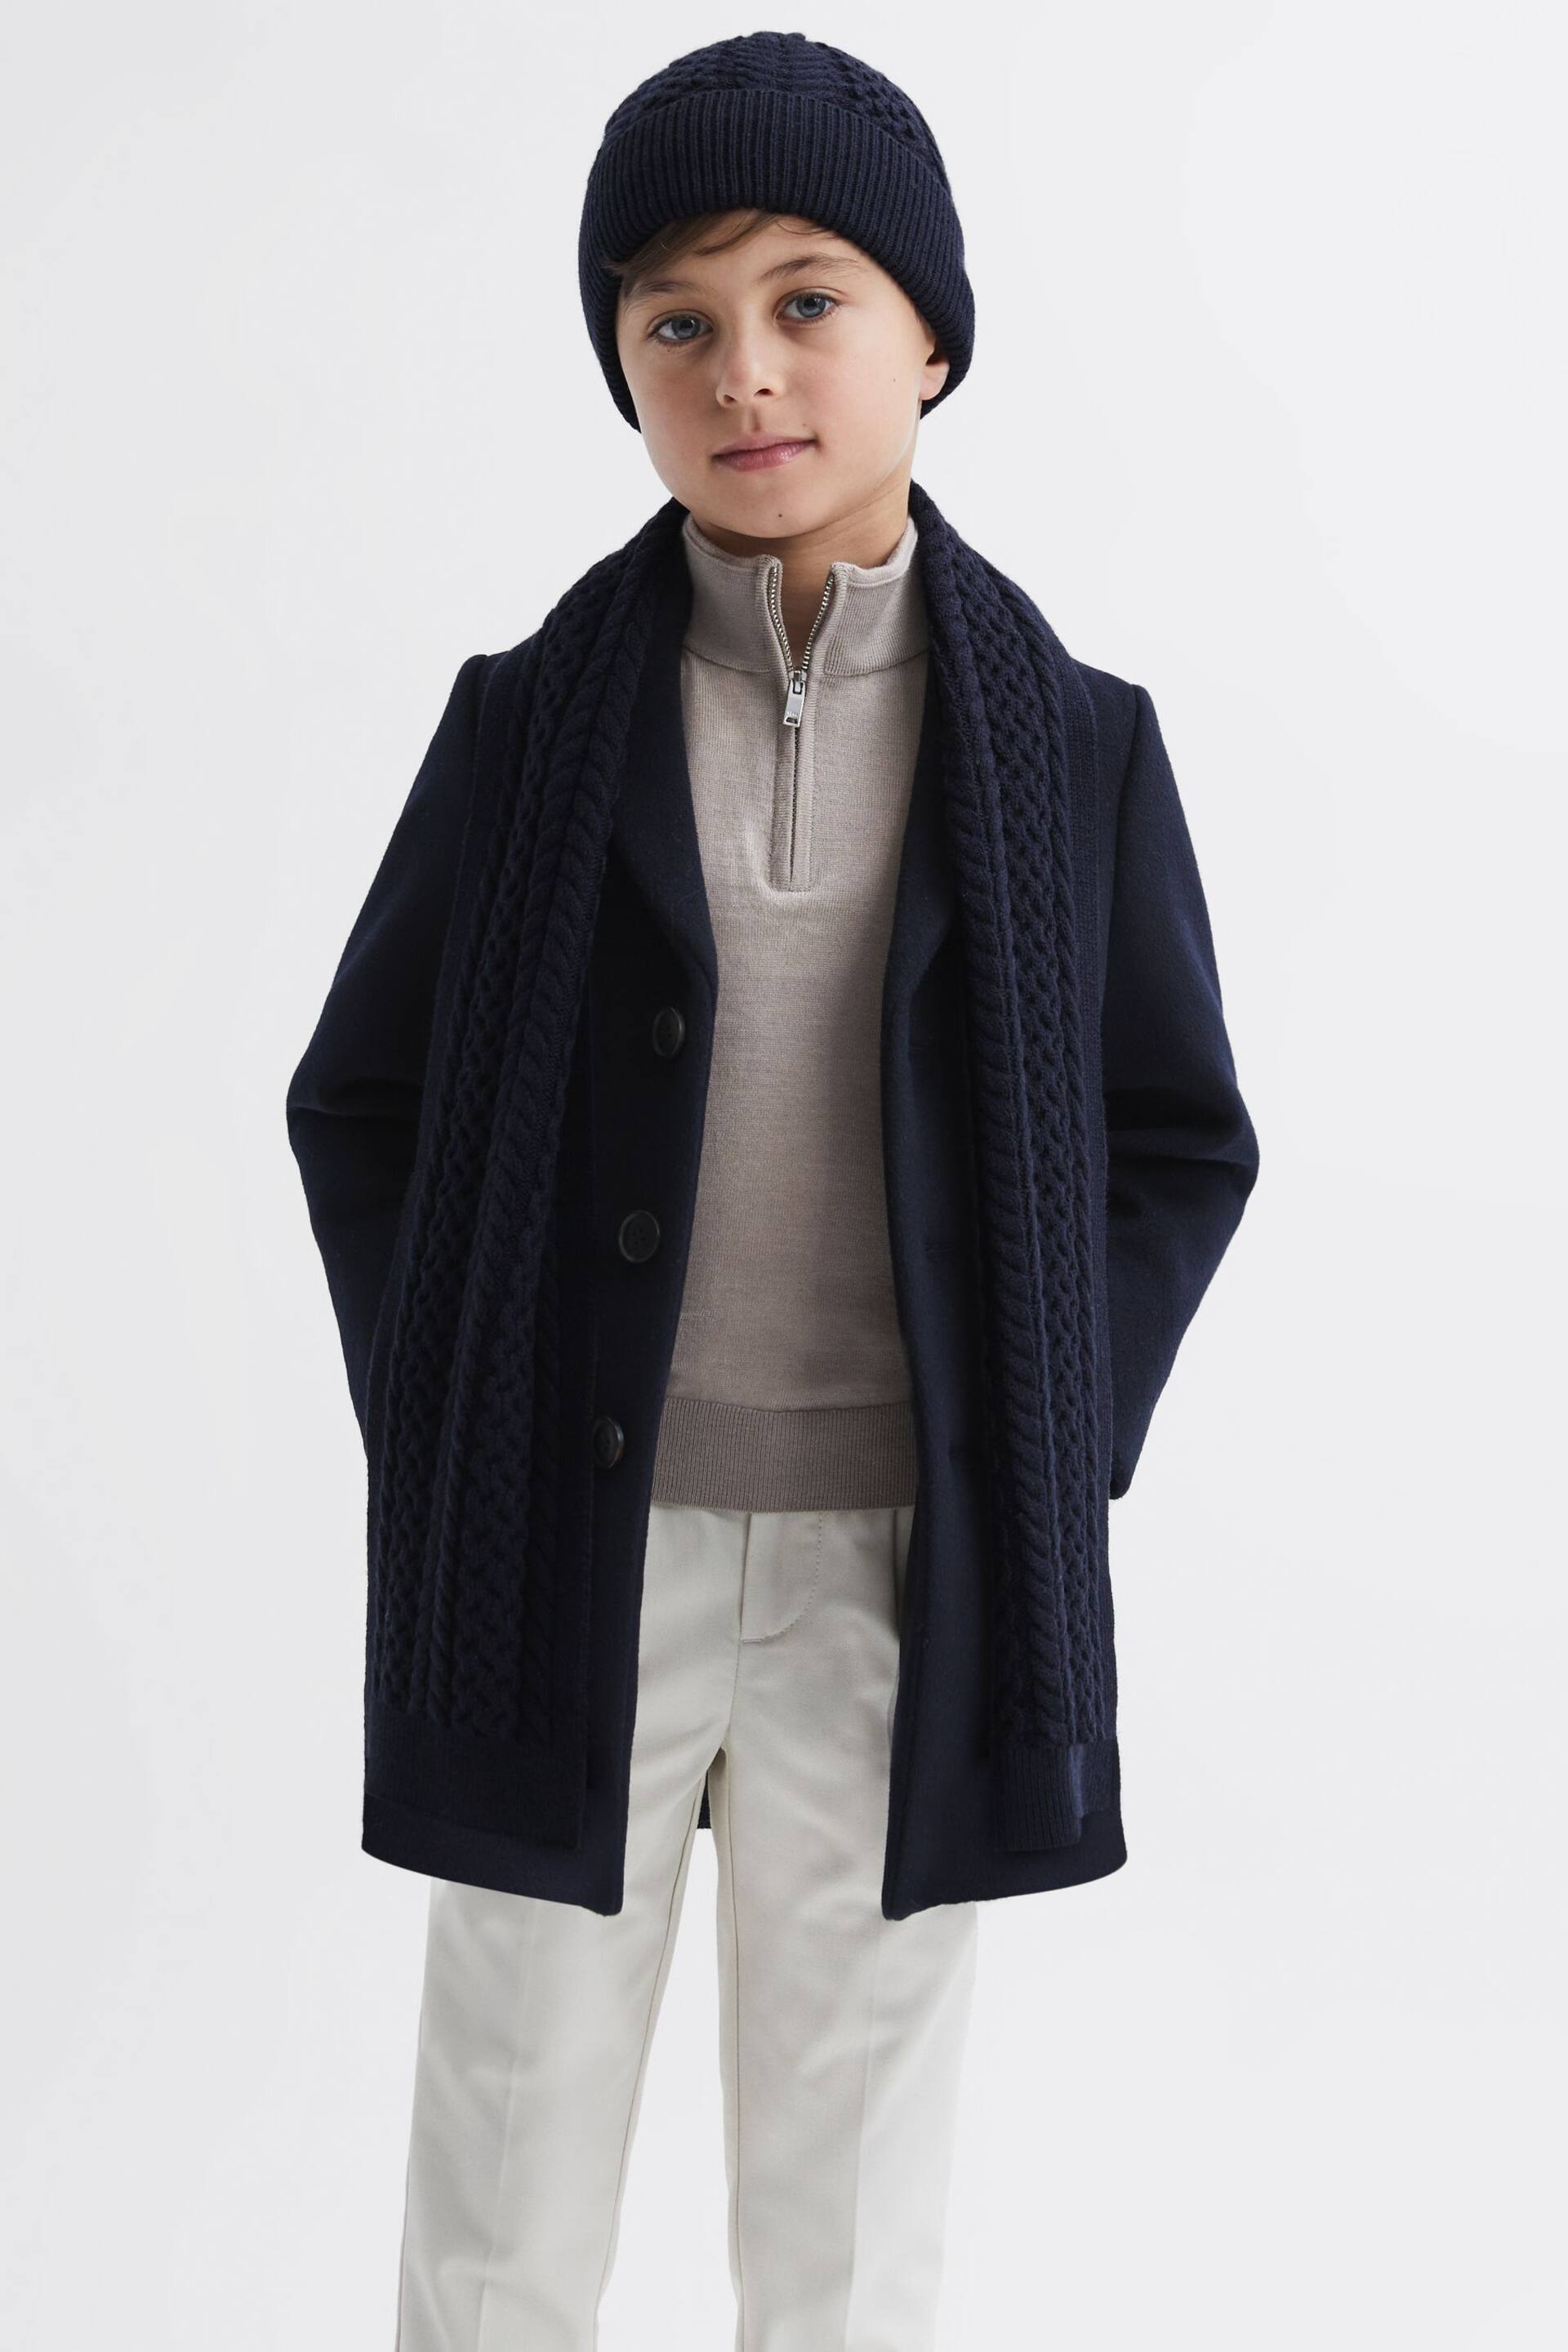 Reiss Navy Heath Junior Knitted Scarf and Beanie Hat Set - Image 2 of 5